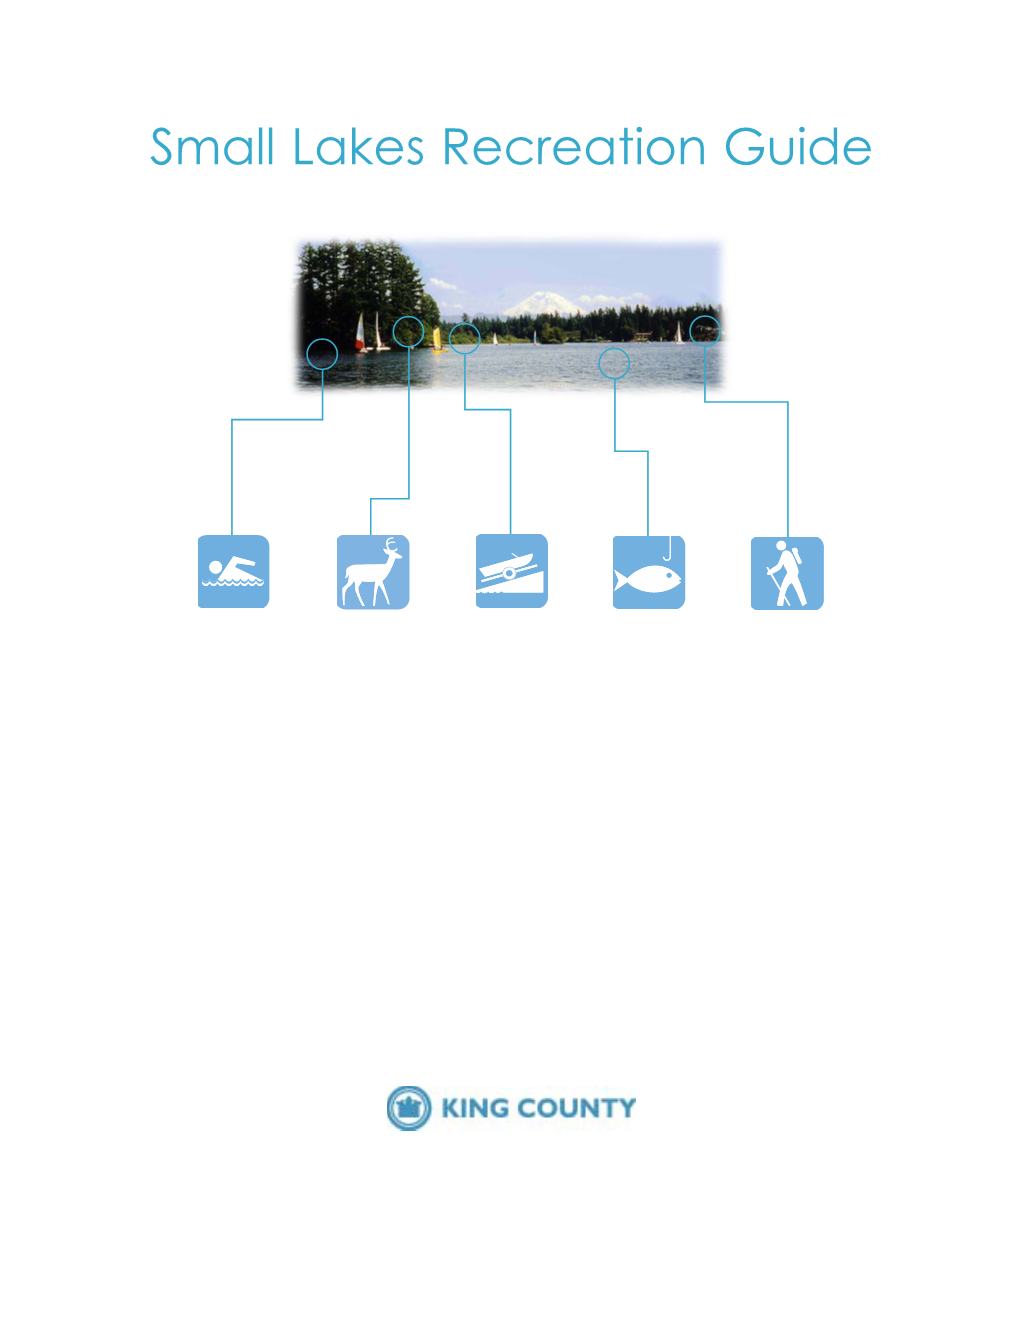 King County Small Lakes Recreation Guide